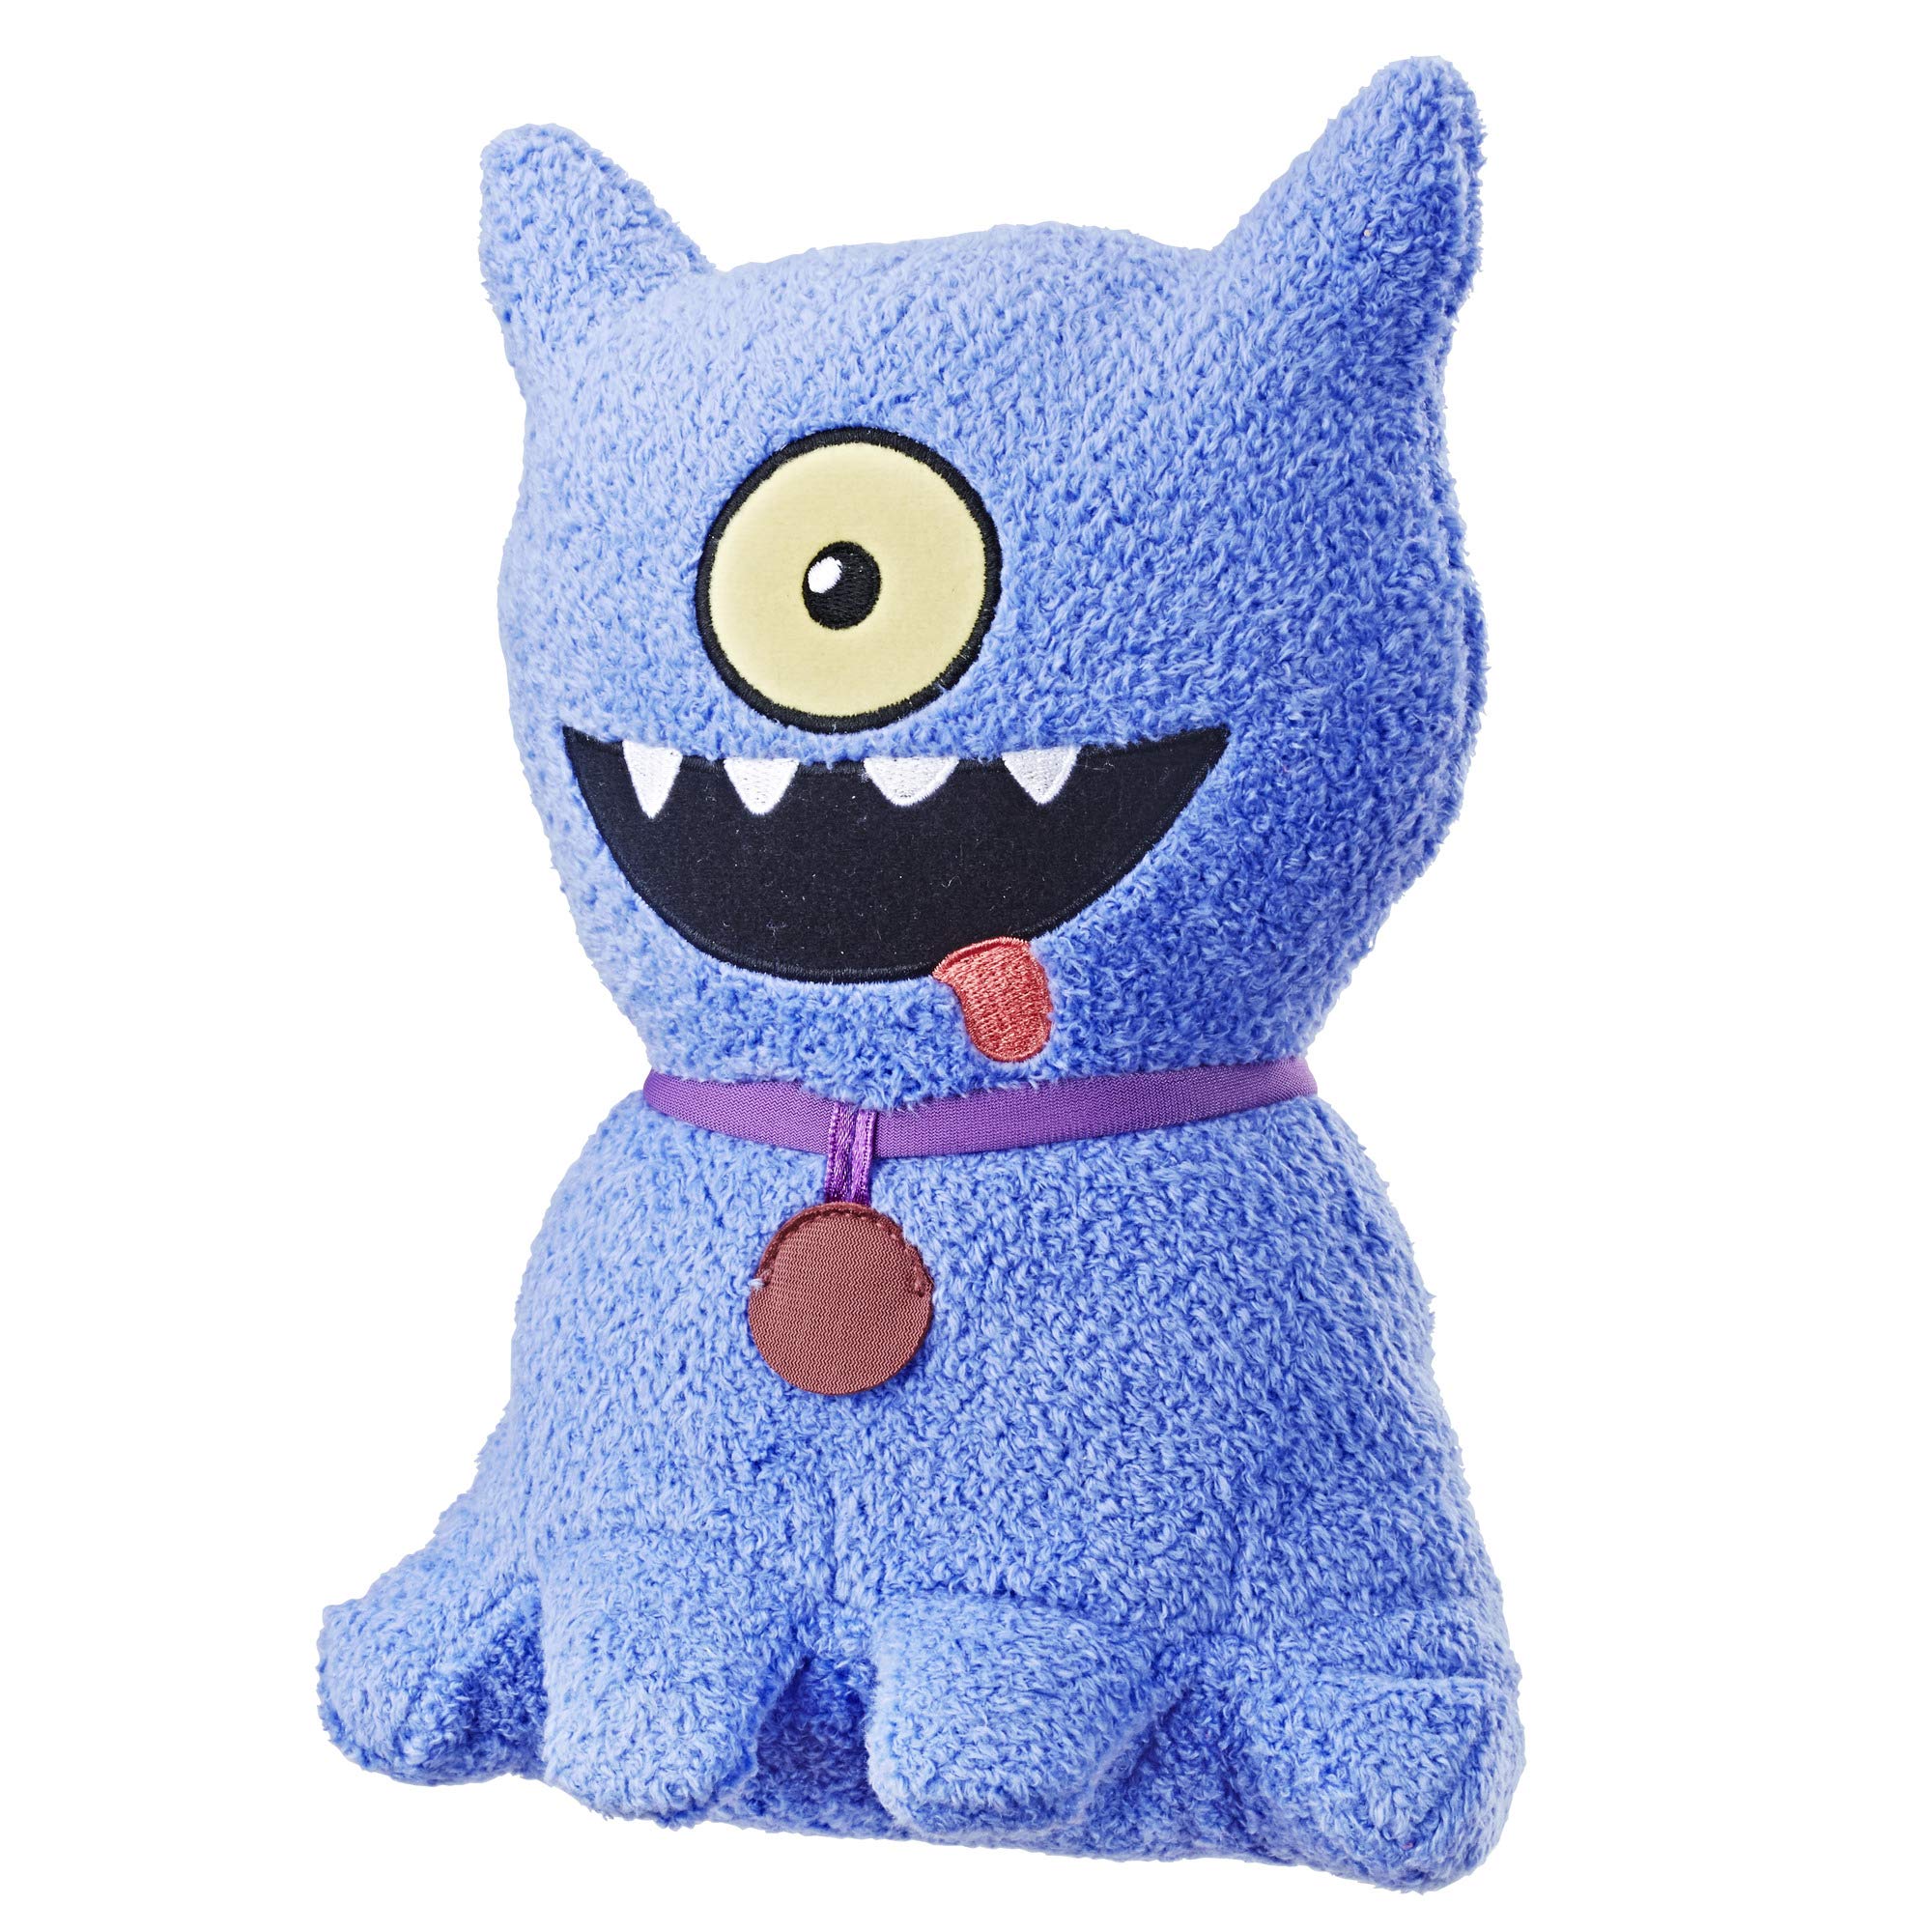 Book Cover Hasbro Uglydolls Feature Sounds Ugly Dog, Stuffed Plush Toy That Talks, 9.5